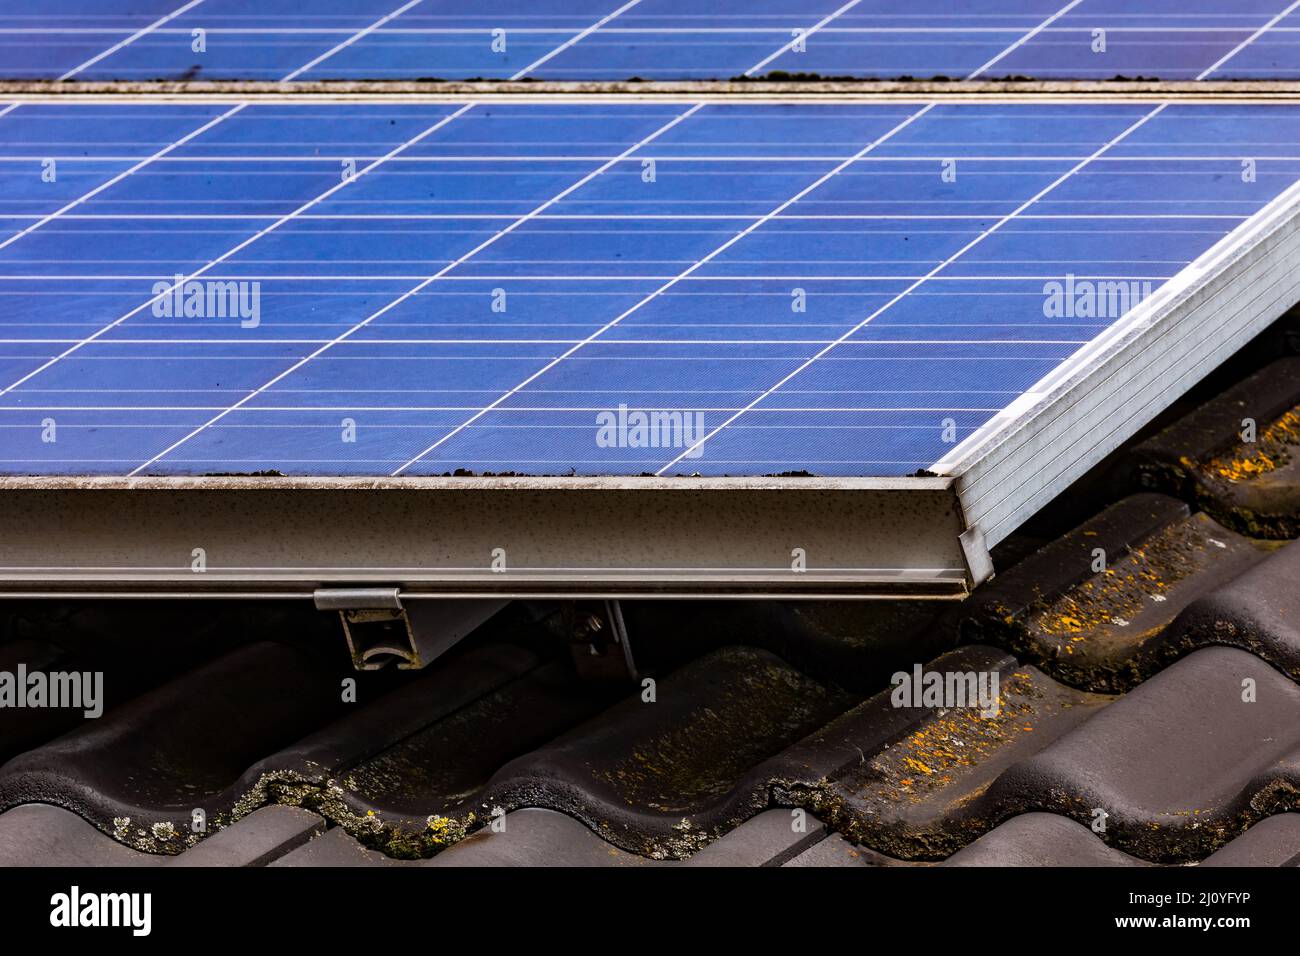 Solar modules of an environmentally friendly house roof system for private power generation with photovoltaics in Germany Stock Photo